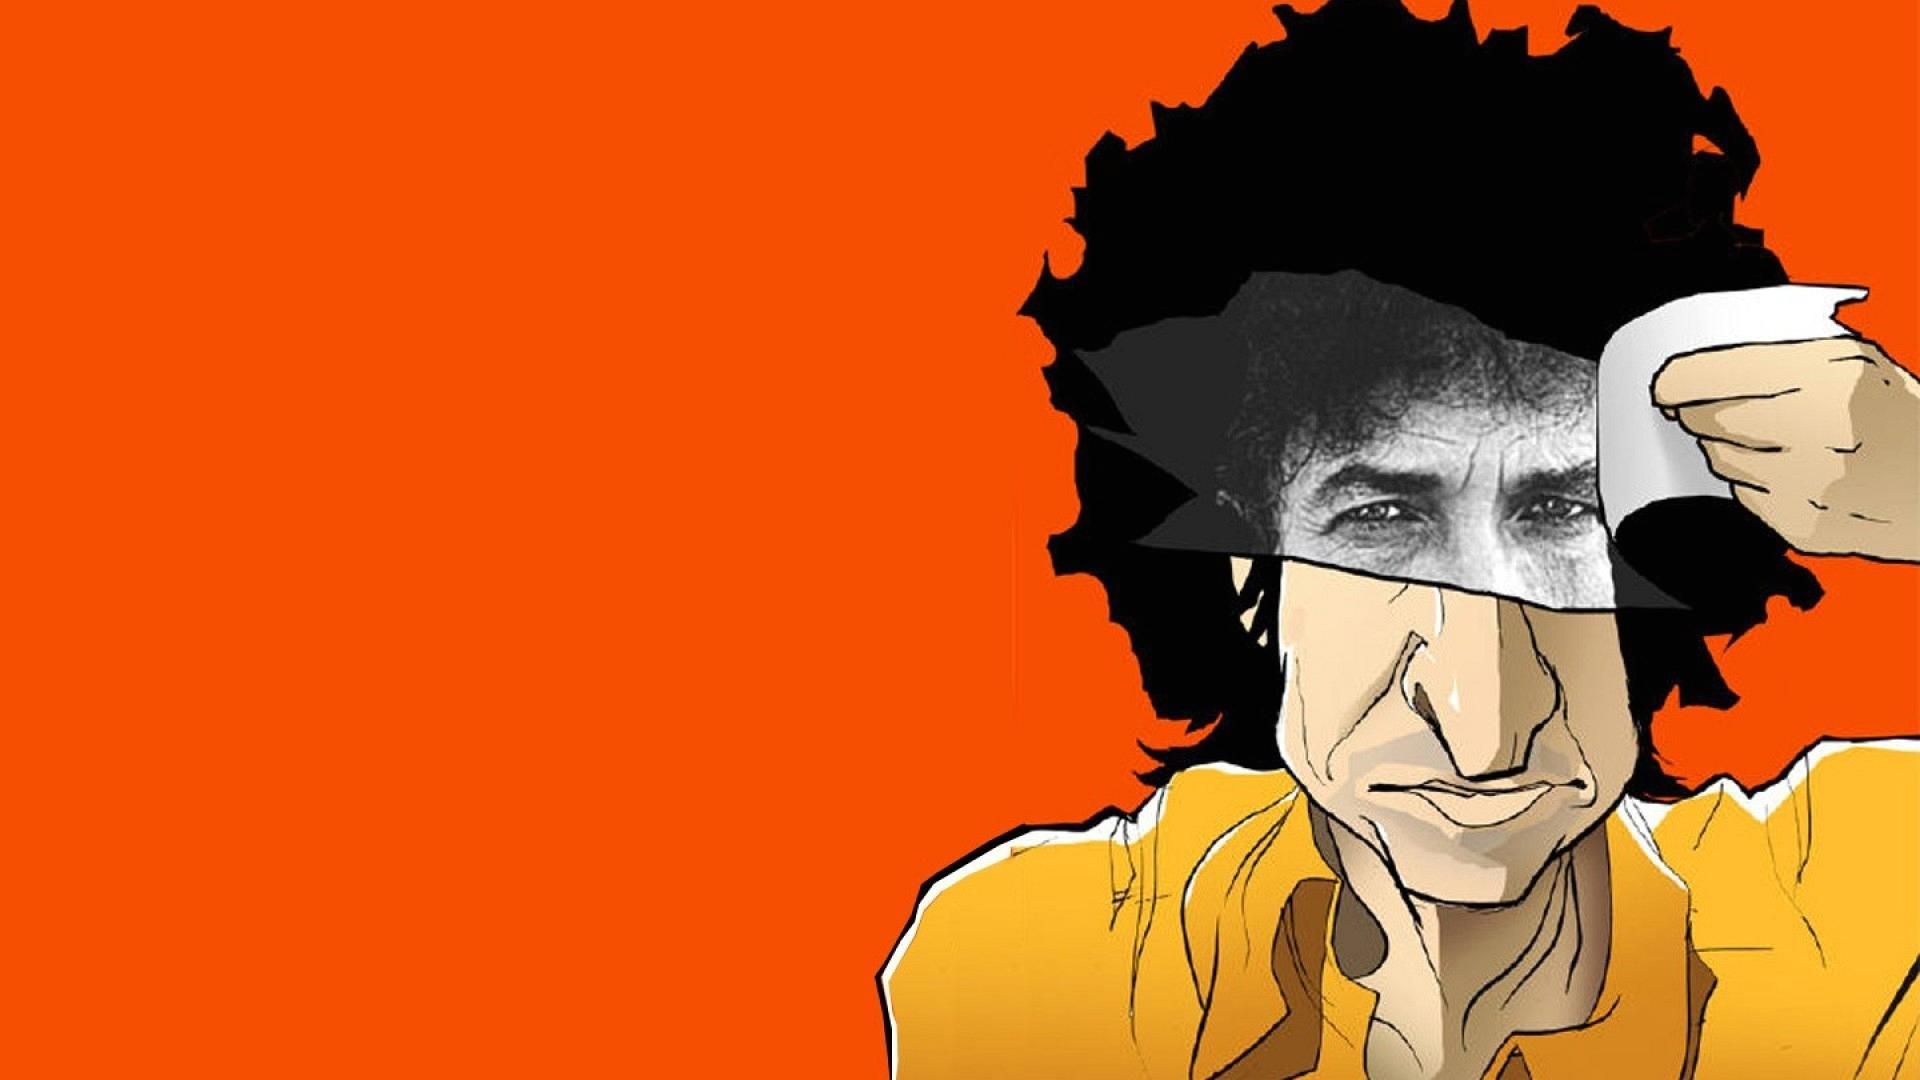 Bob Dylan: One of America's most acclaimed singer-songwriters, Illustration. 1920x1080 Full HD Wallpaper.